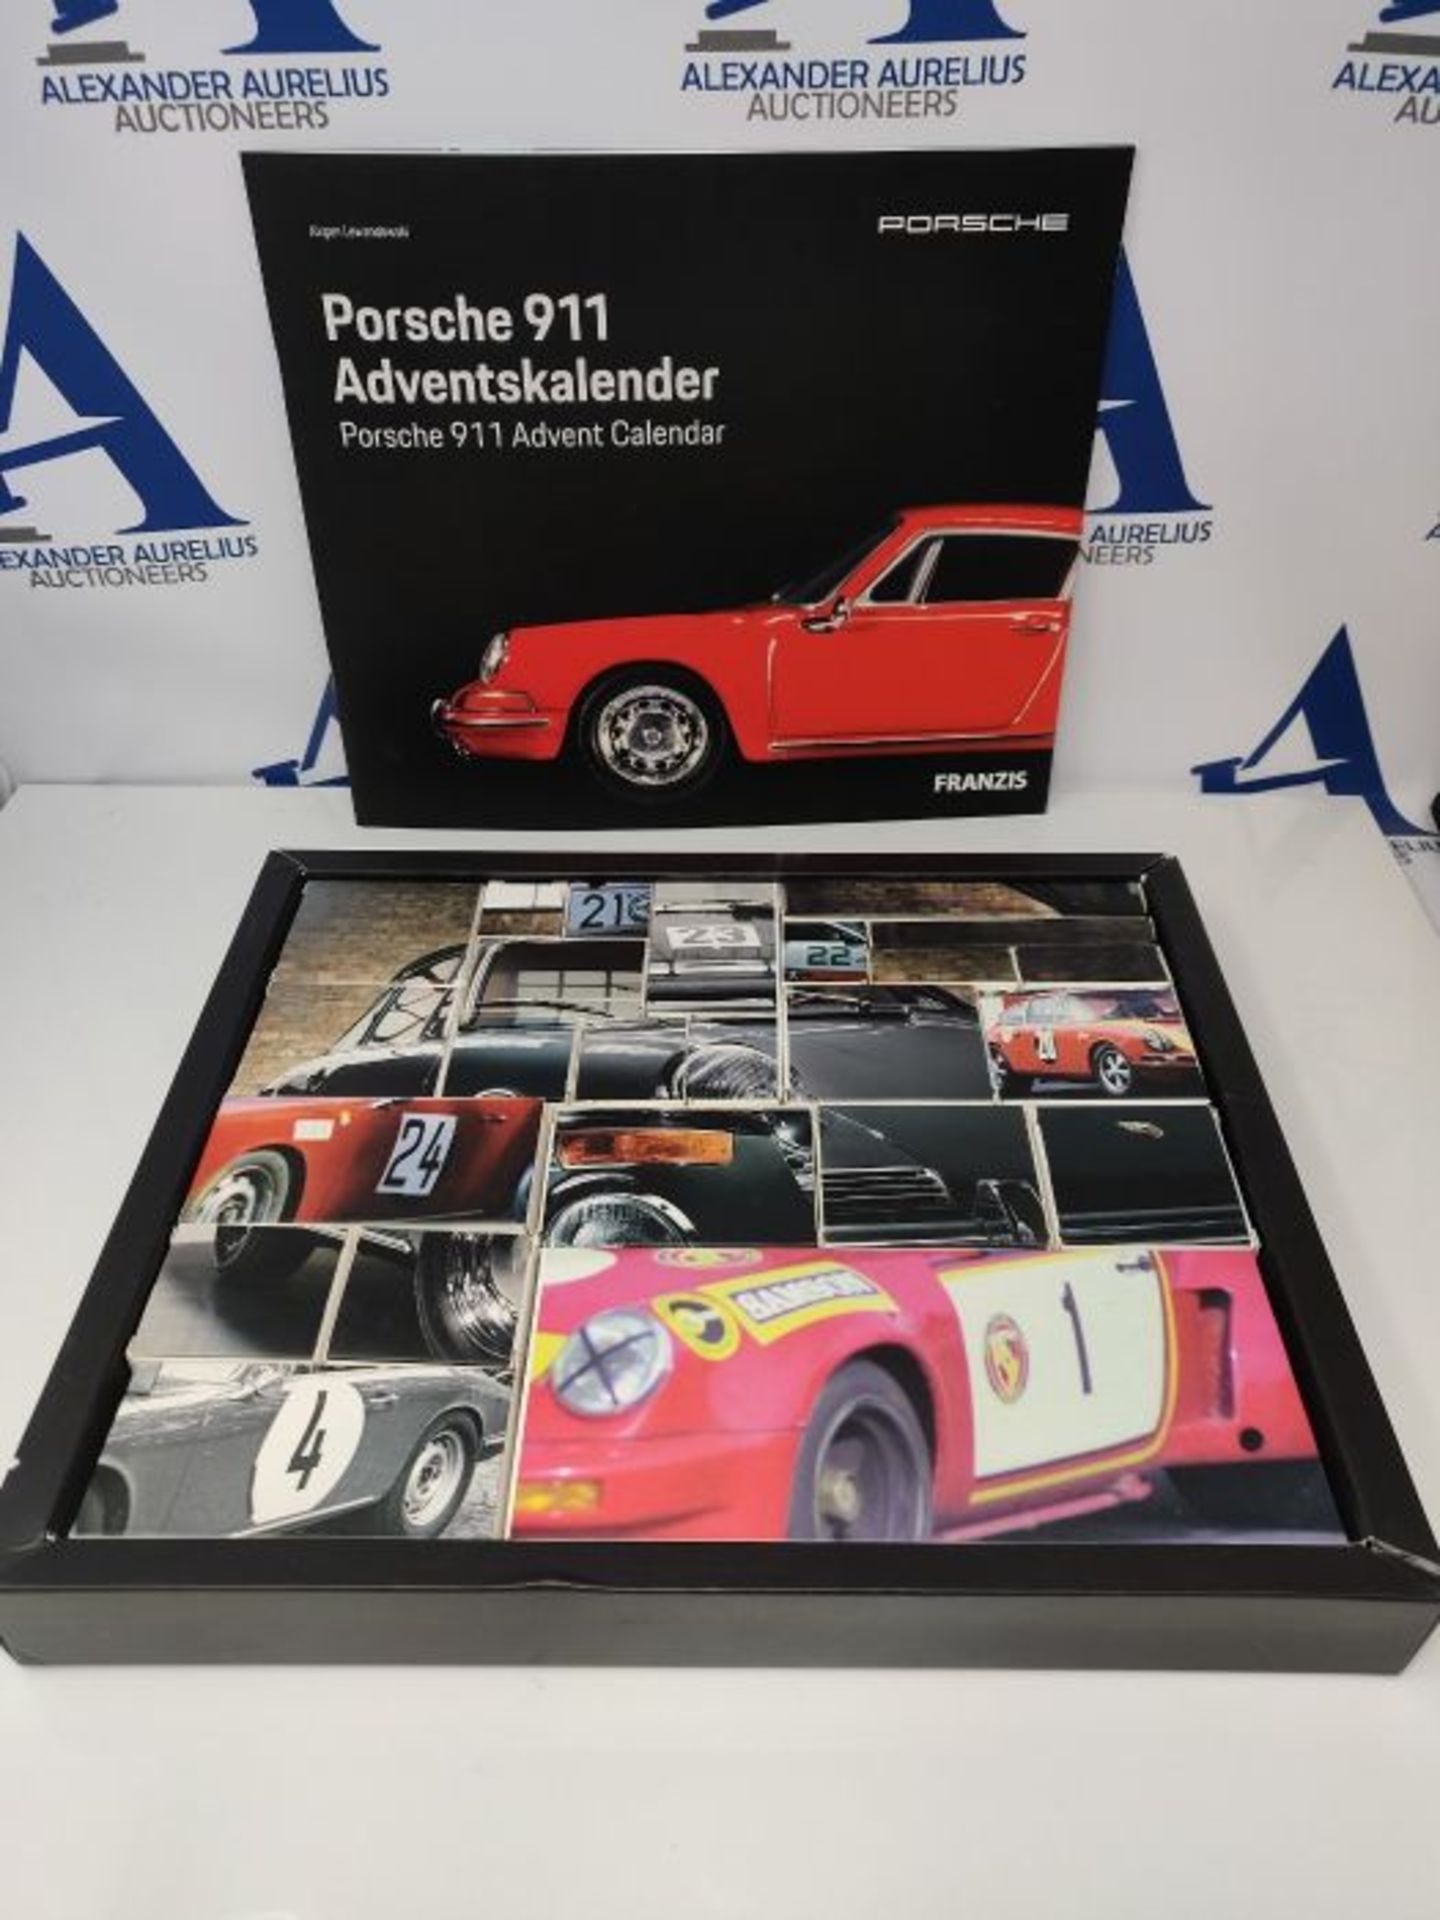 RRP £53.00 Franzis Porsche 911 55199-3 Advent Calendar Red Vehicle Kit Scale 1:43 with Sound Modu - Image 3 of 3